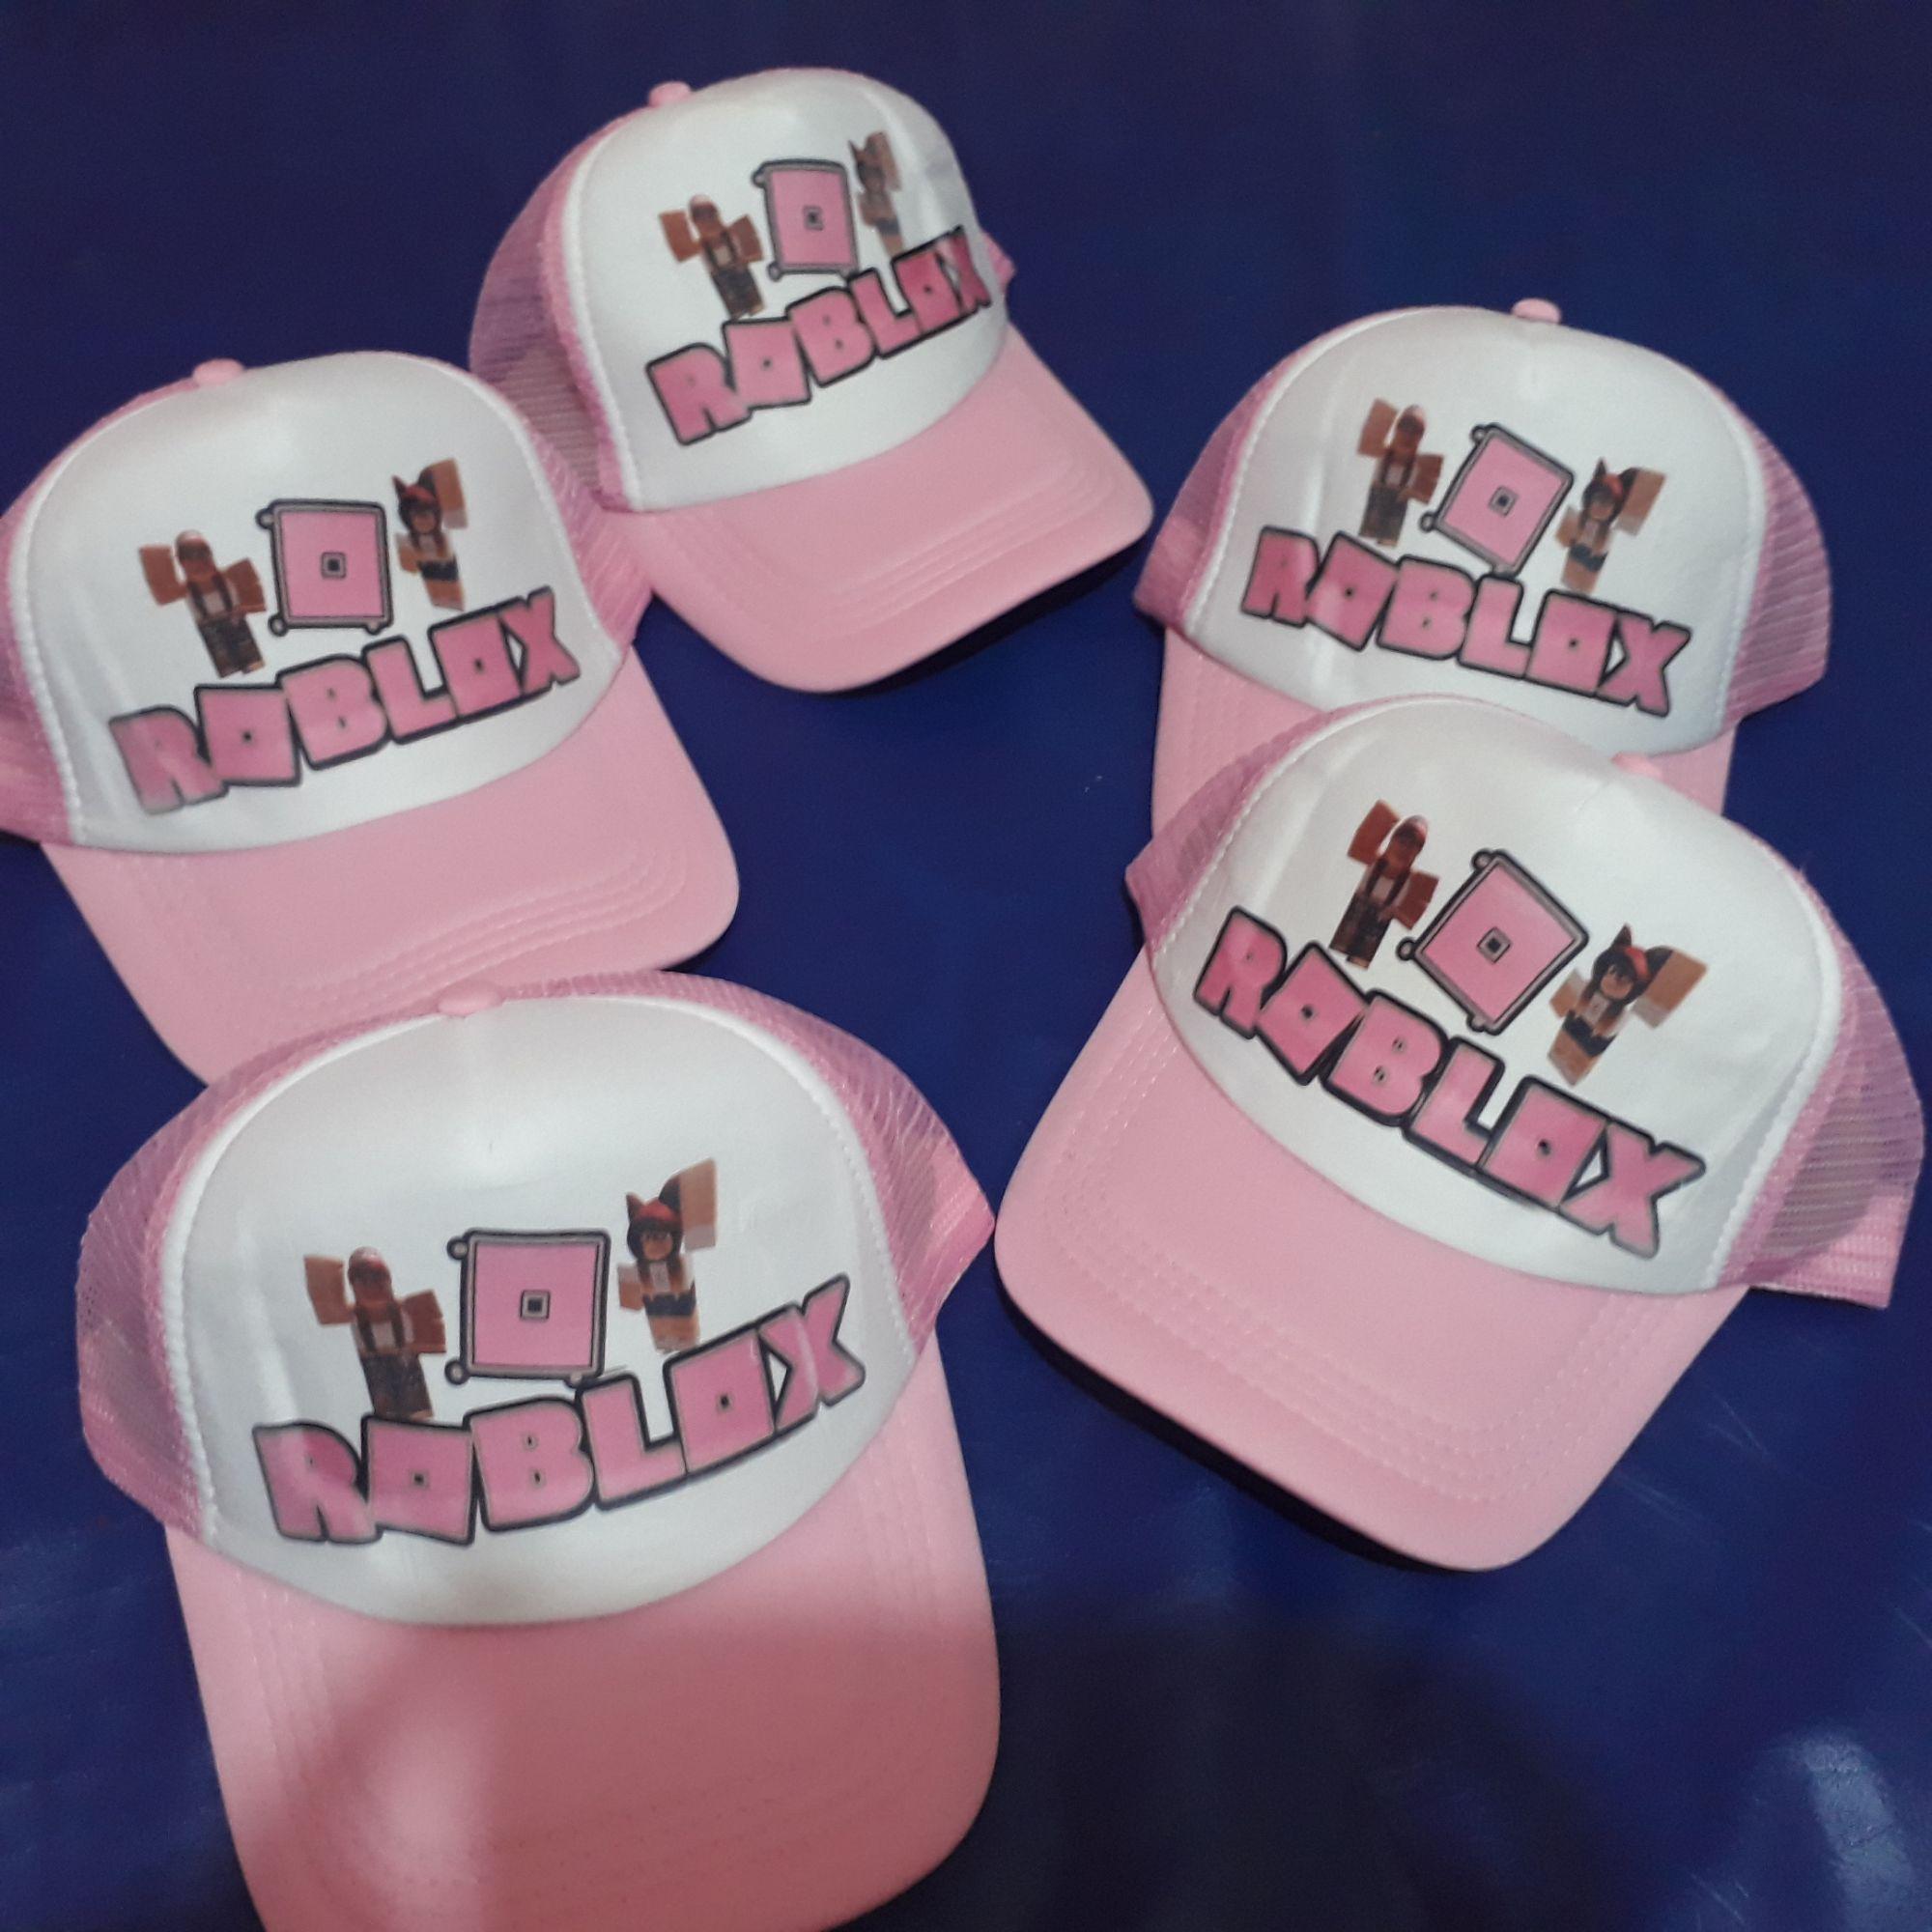 Roblox Cap Pink Buy Sell Online Hats Caps With Cheap Price Lazada Ph - adjustable kids caps game roblox printed cap casual outdoor baseball hats boys girls hats childrens party toy hats xmas gift